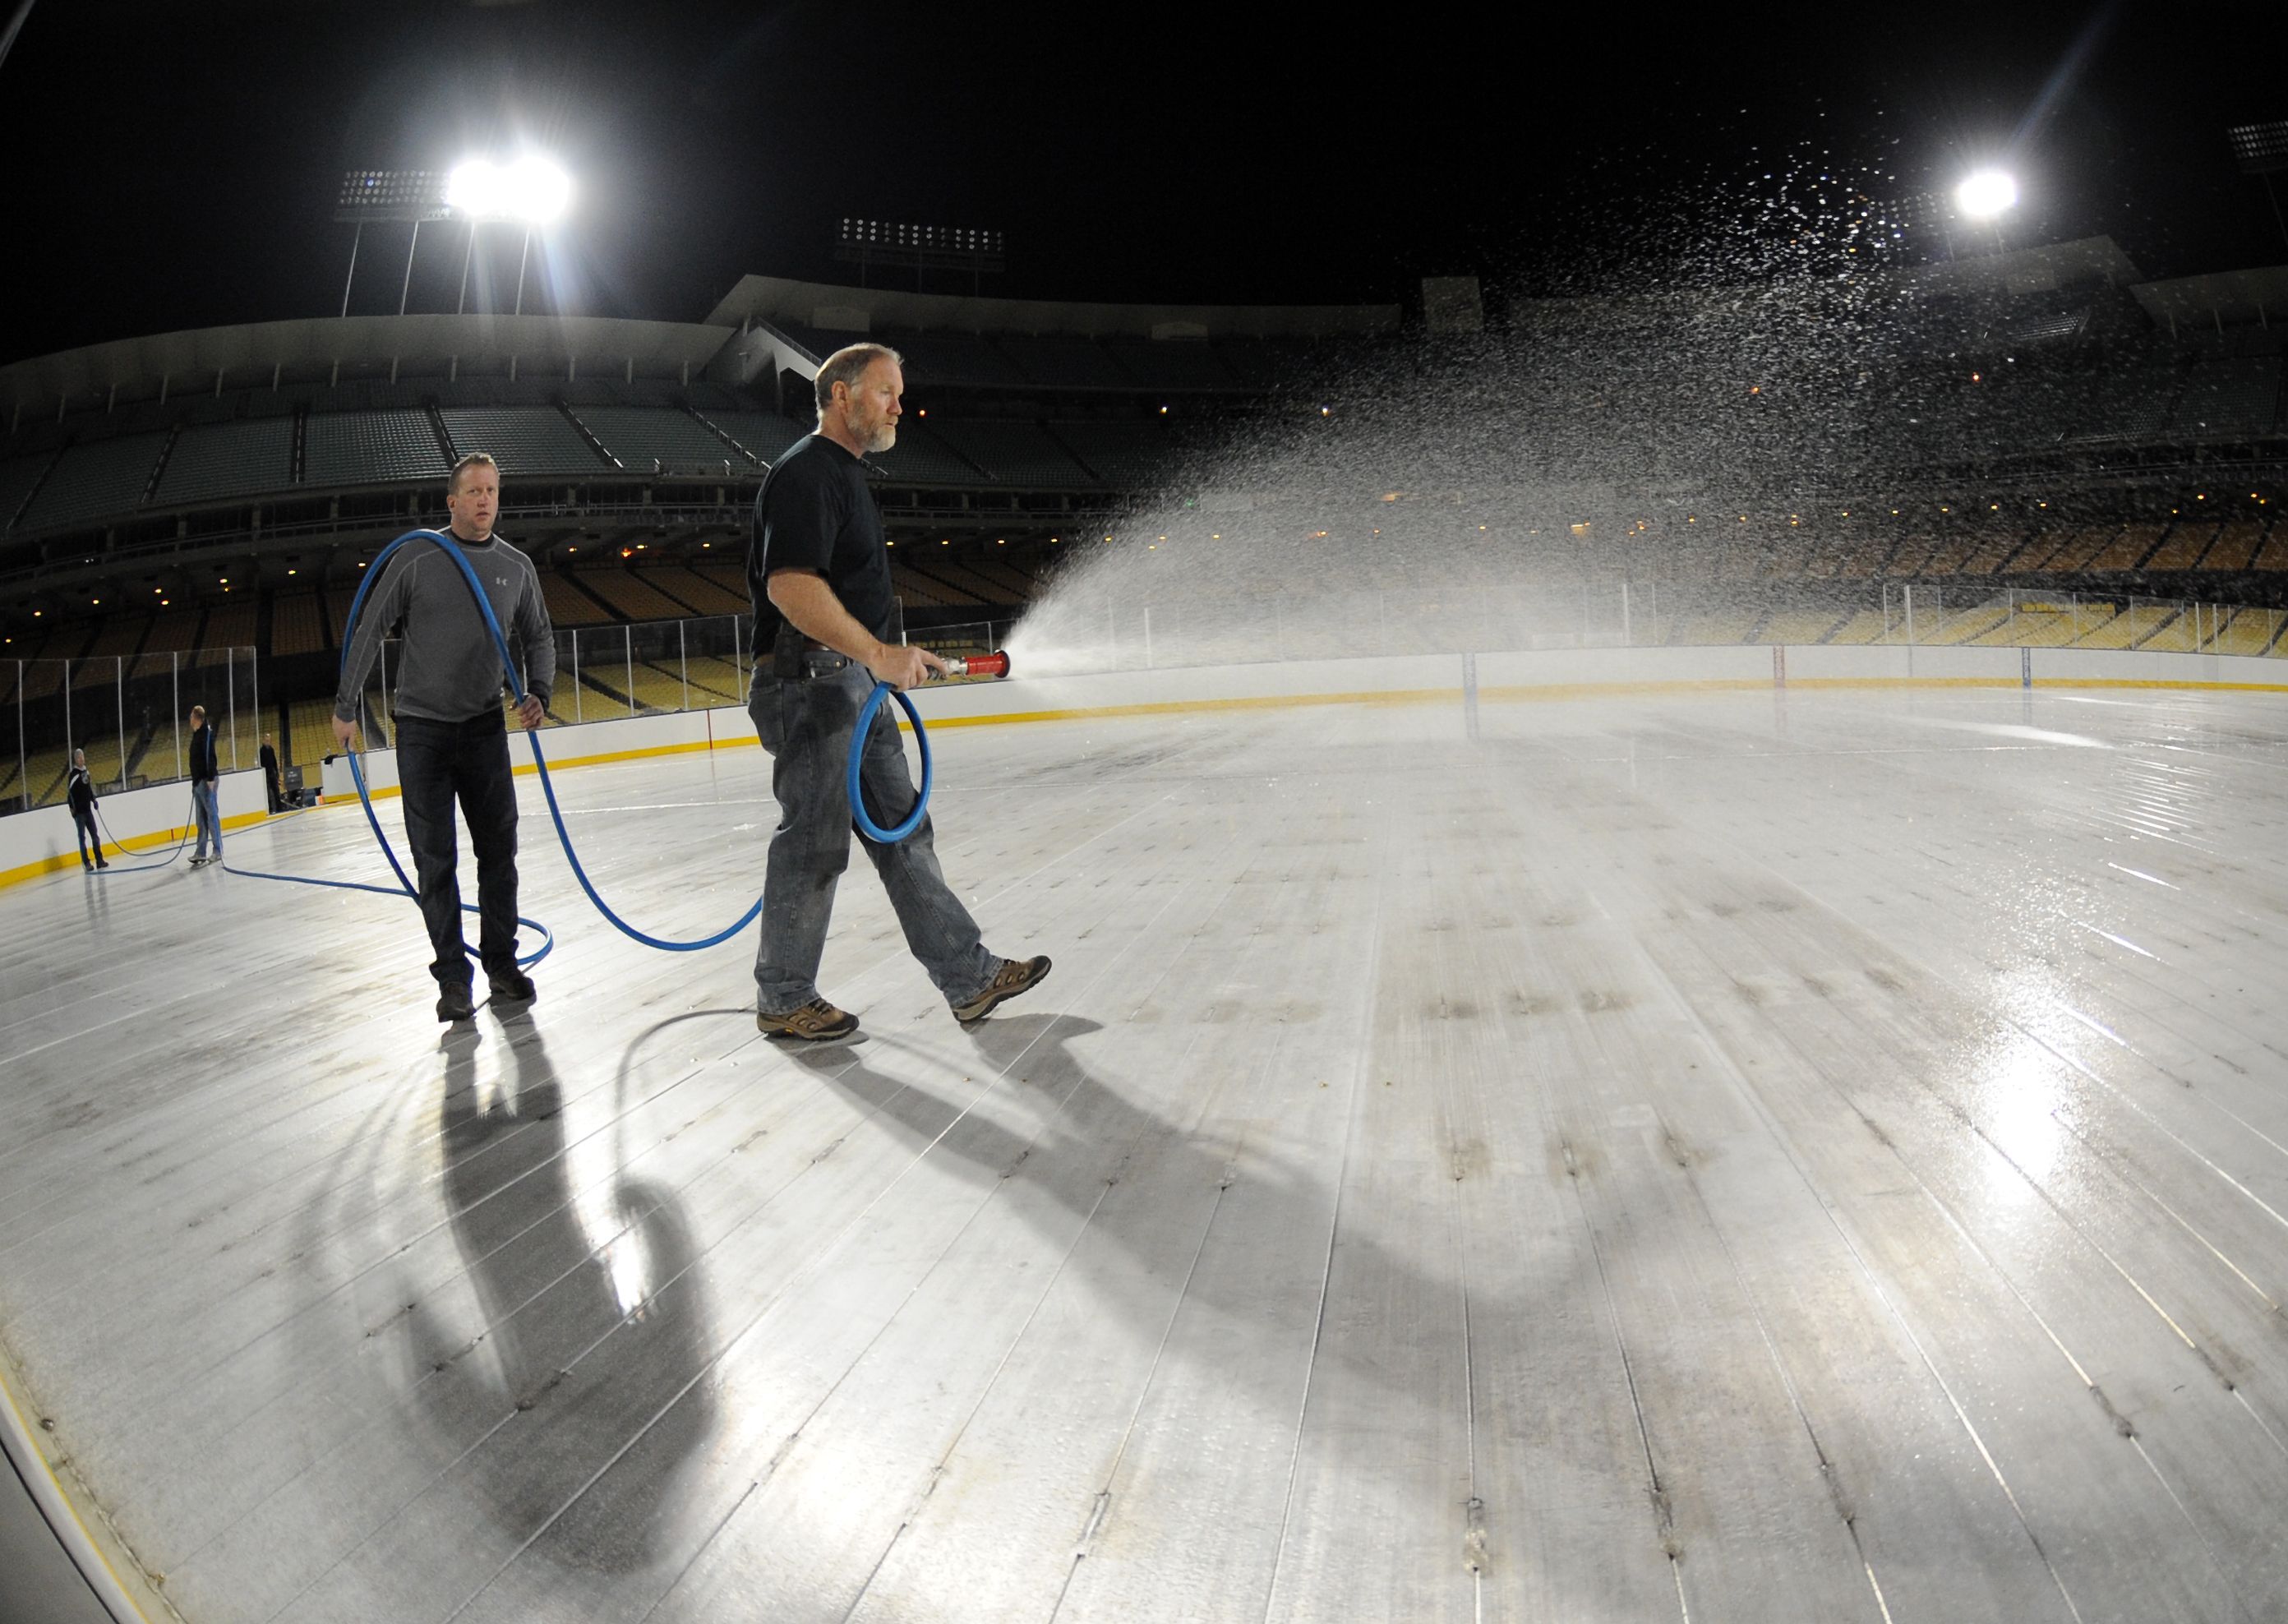 Behind the Scenes on How the NHL Makes Such Perfect Ice